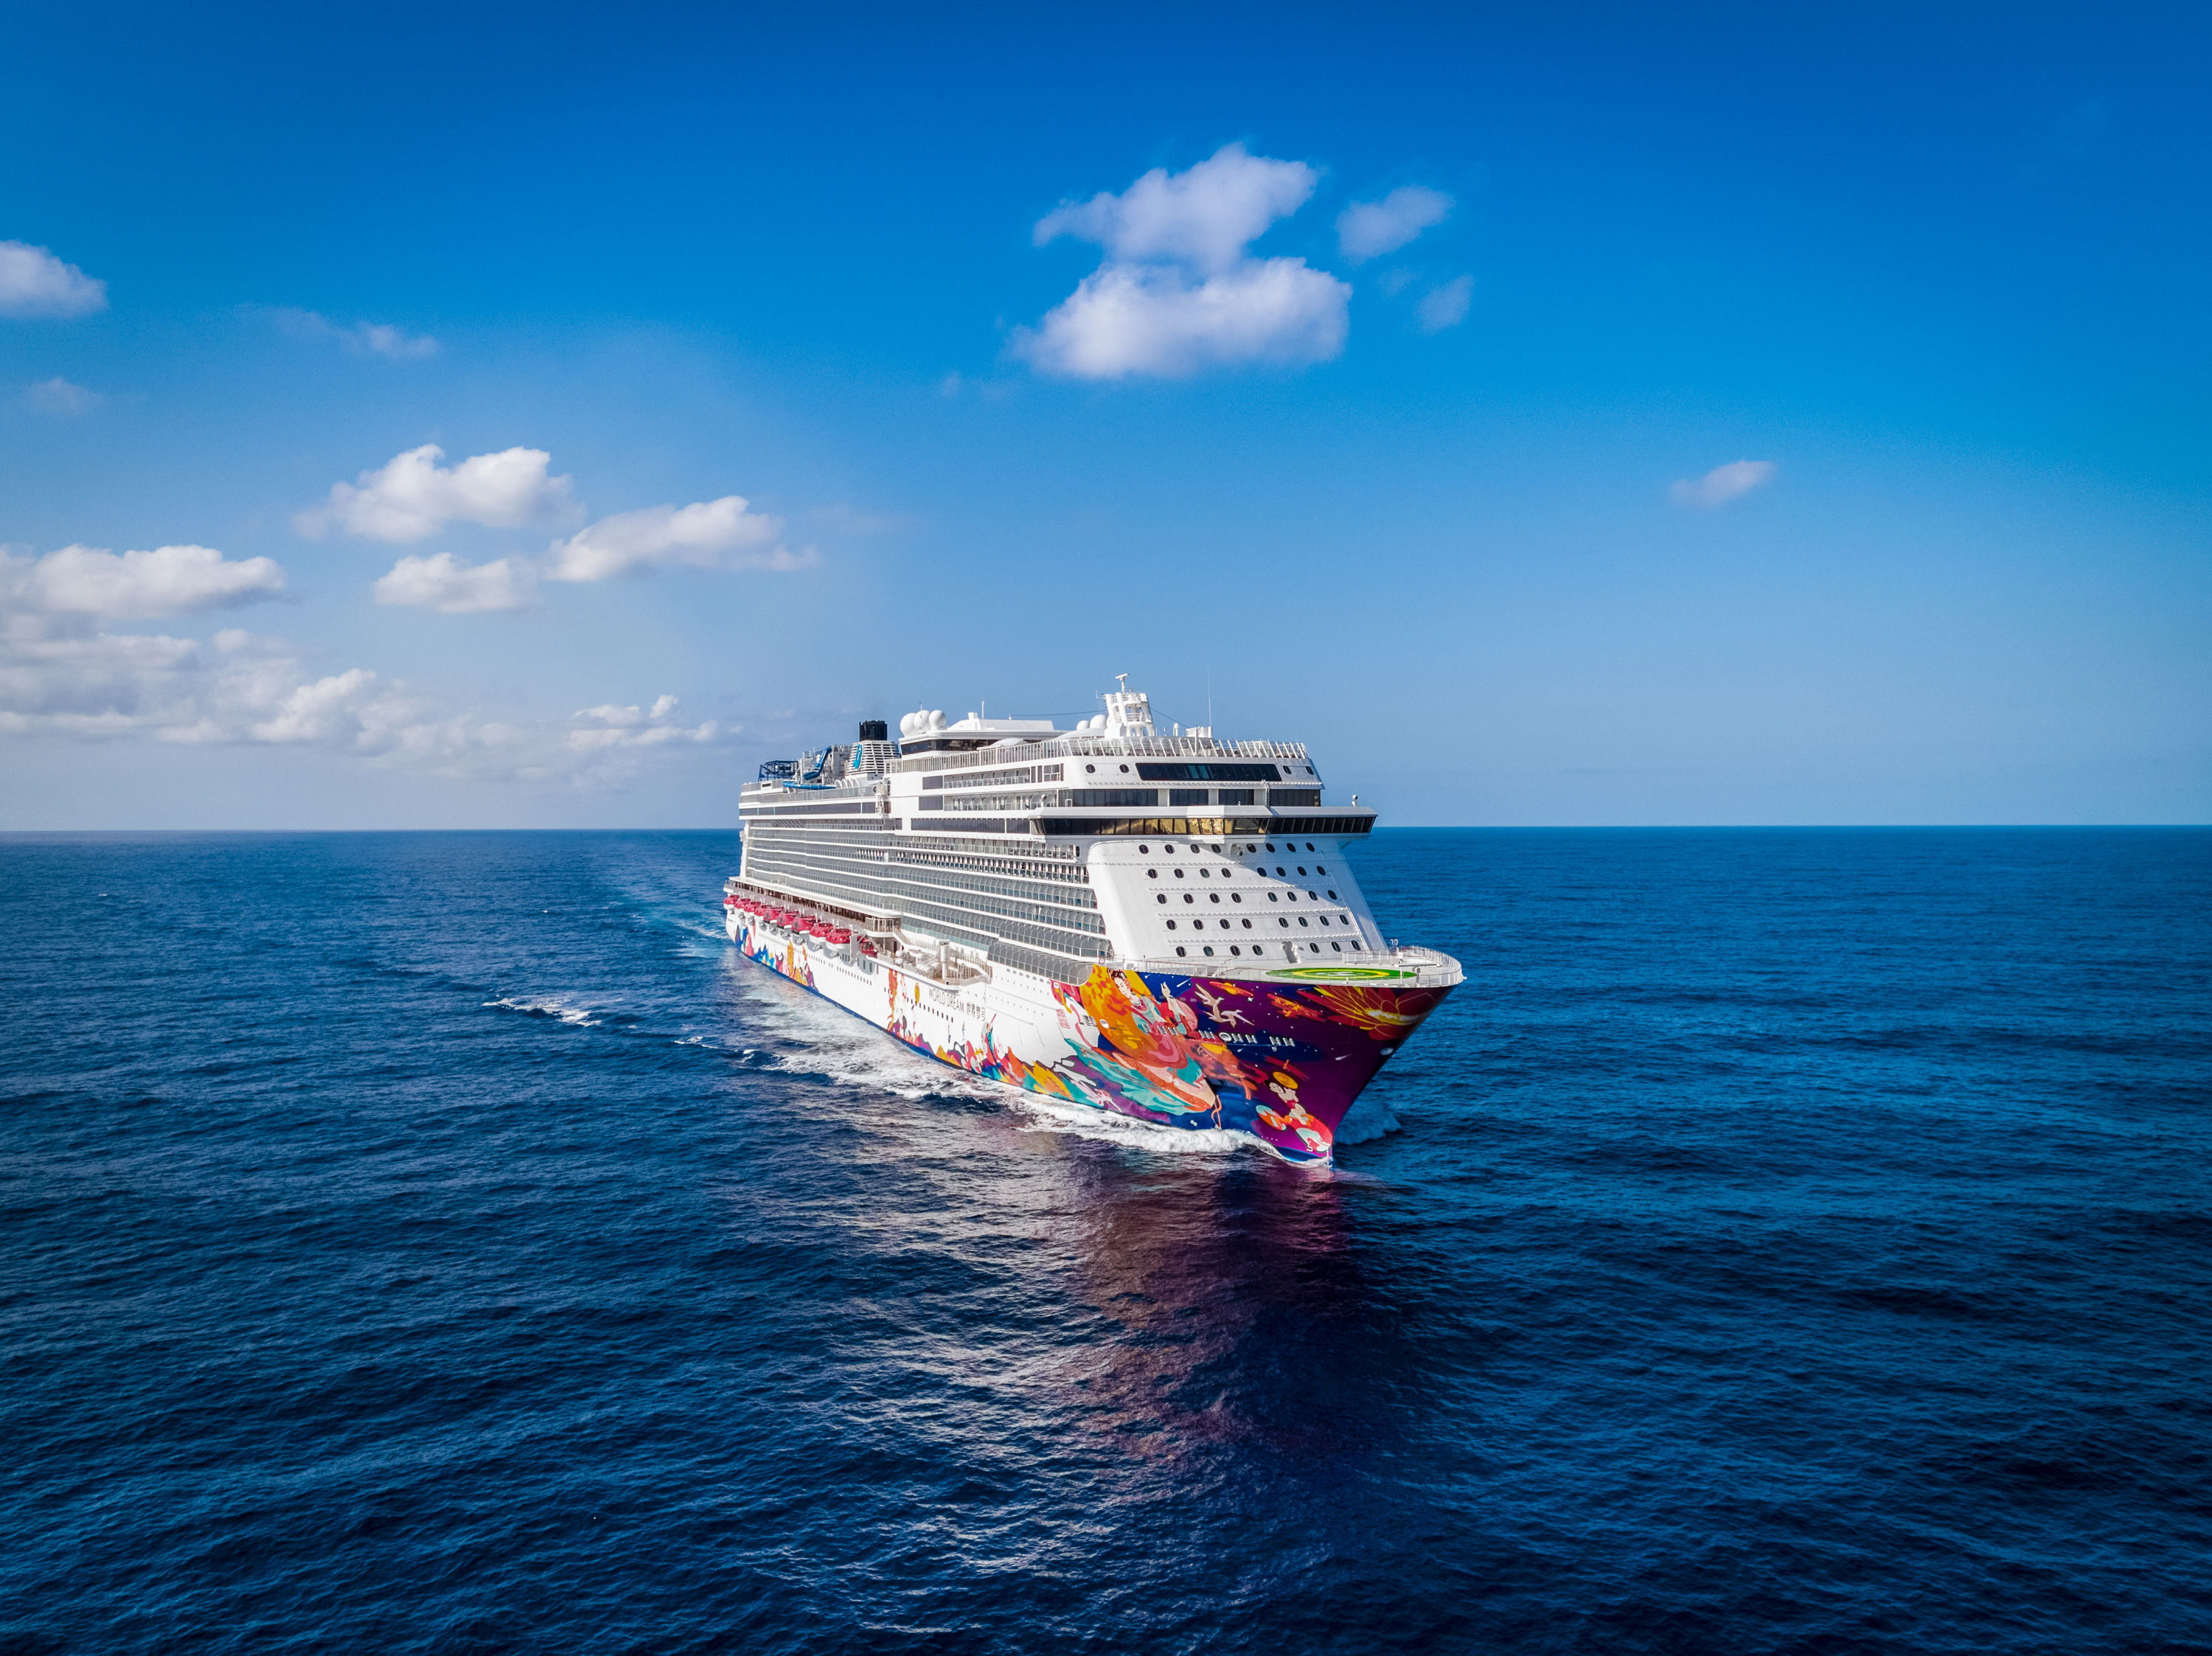 DREAM CRUISES “SUPPORTS LOCAL” IN PARTNERSHIPS WITH HOMEGROWN BRANDS